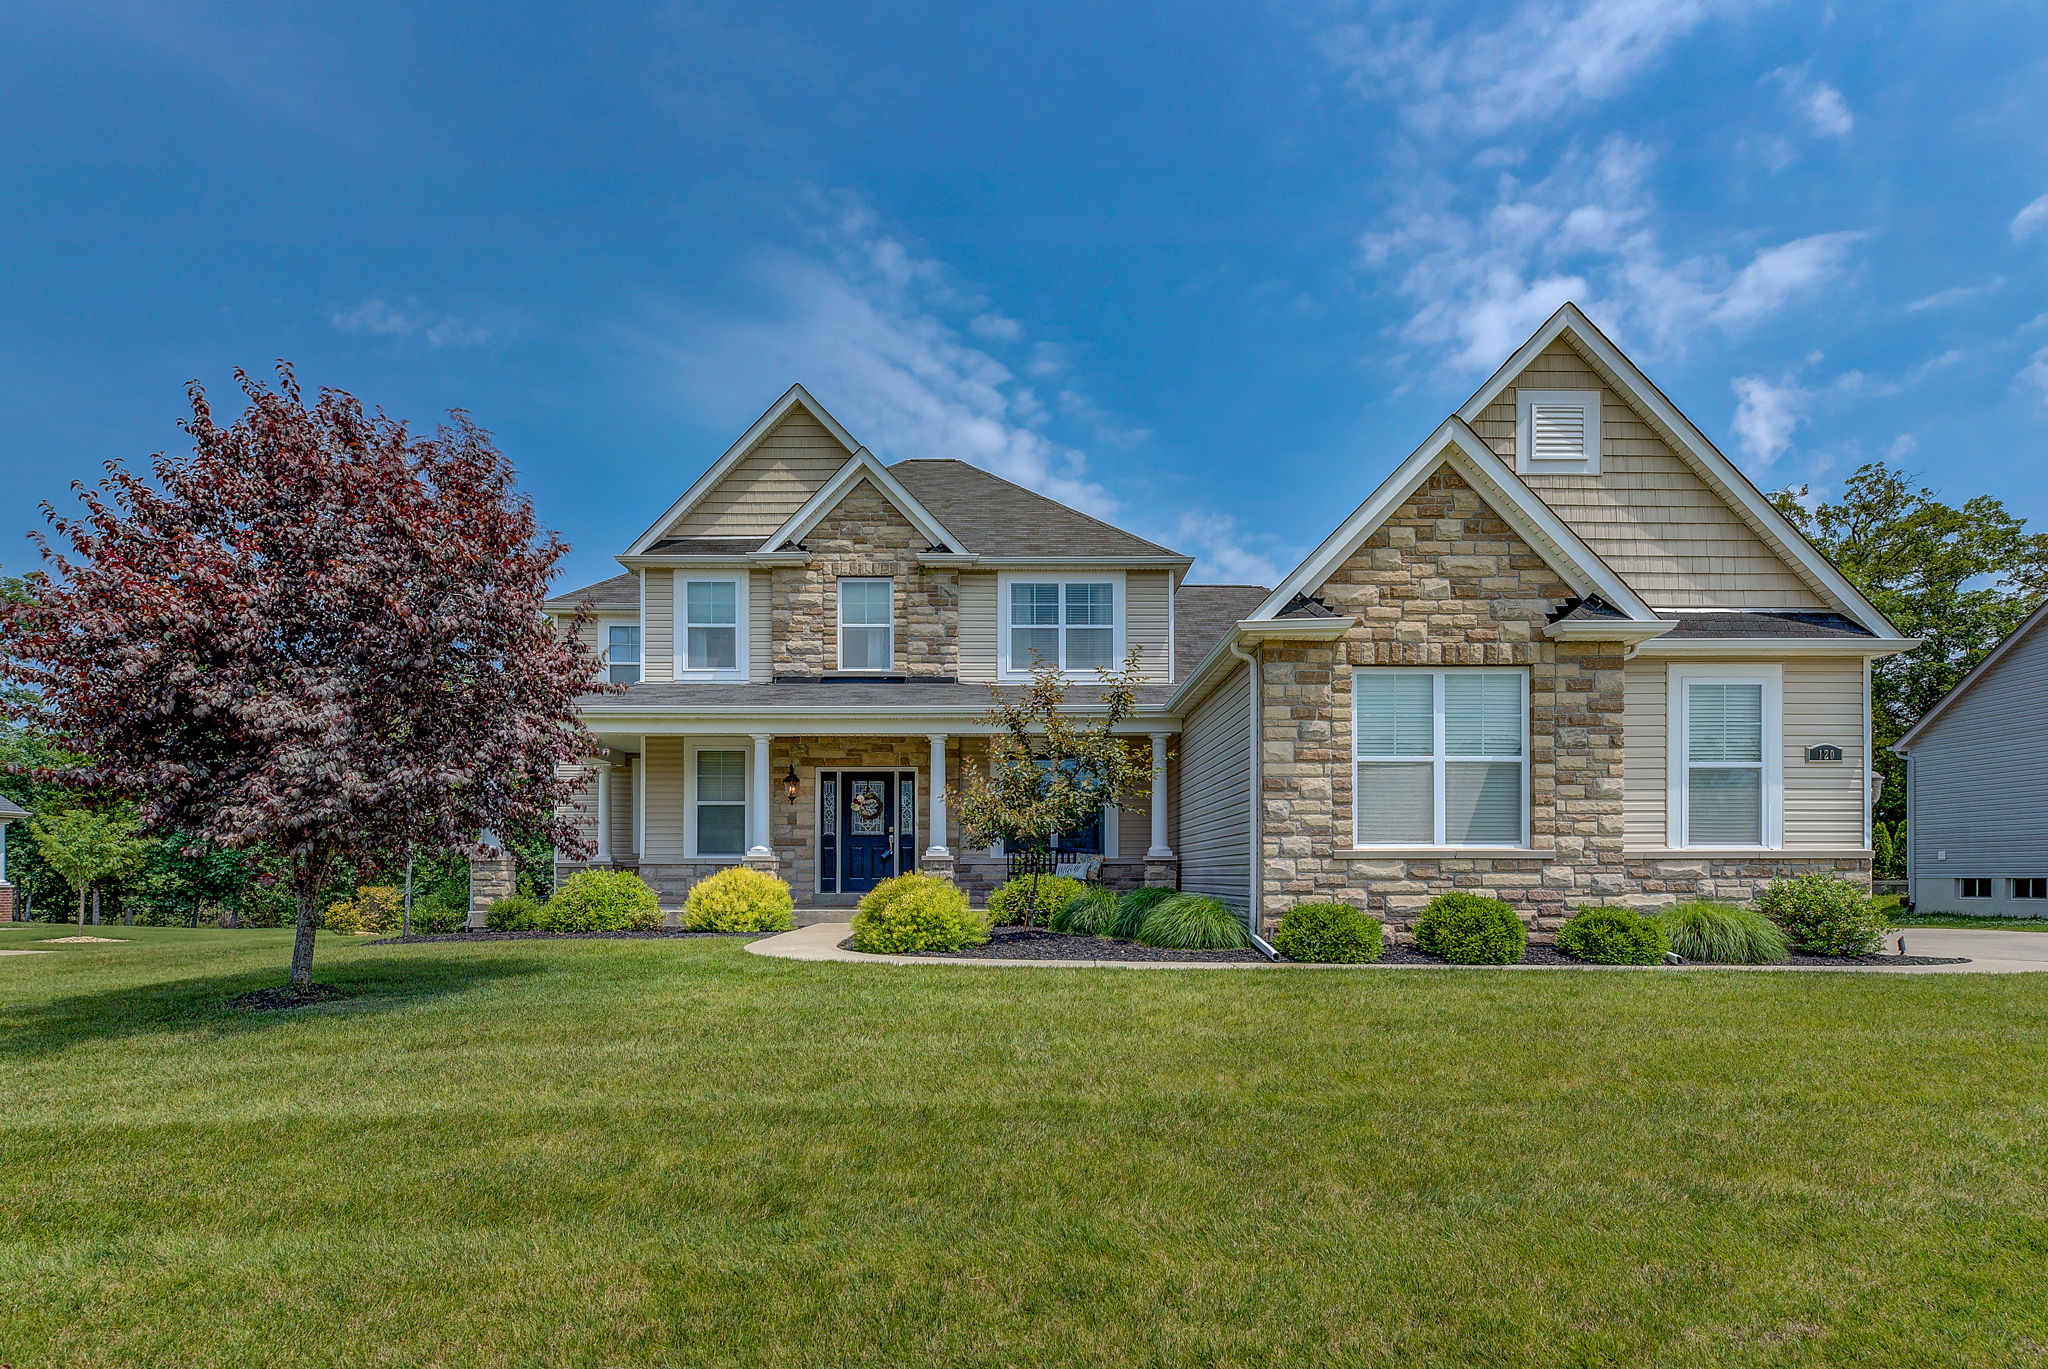  120 Woodspur Drive, Wentzville, MO 63385, US